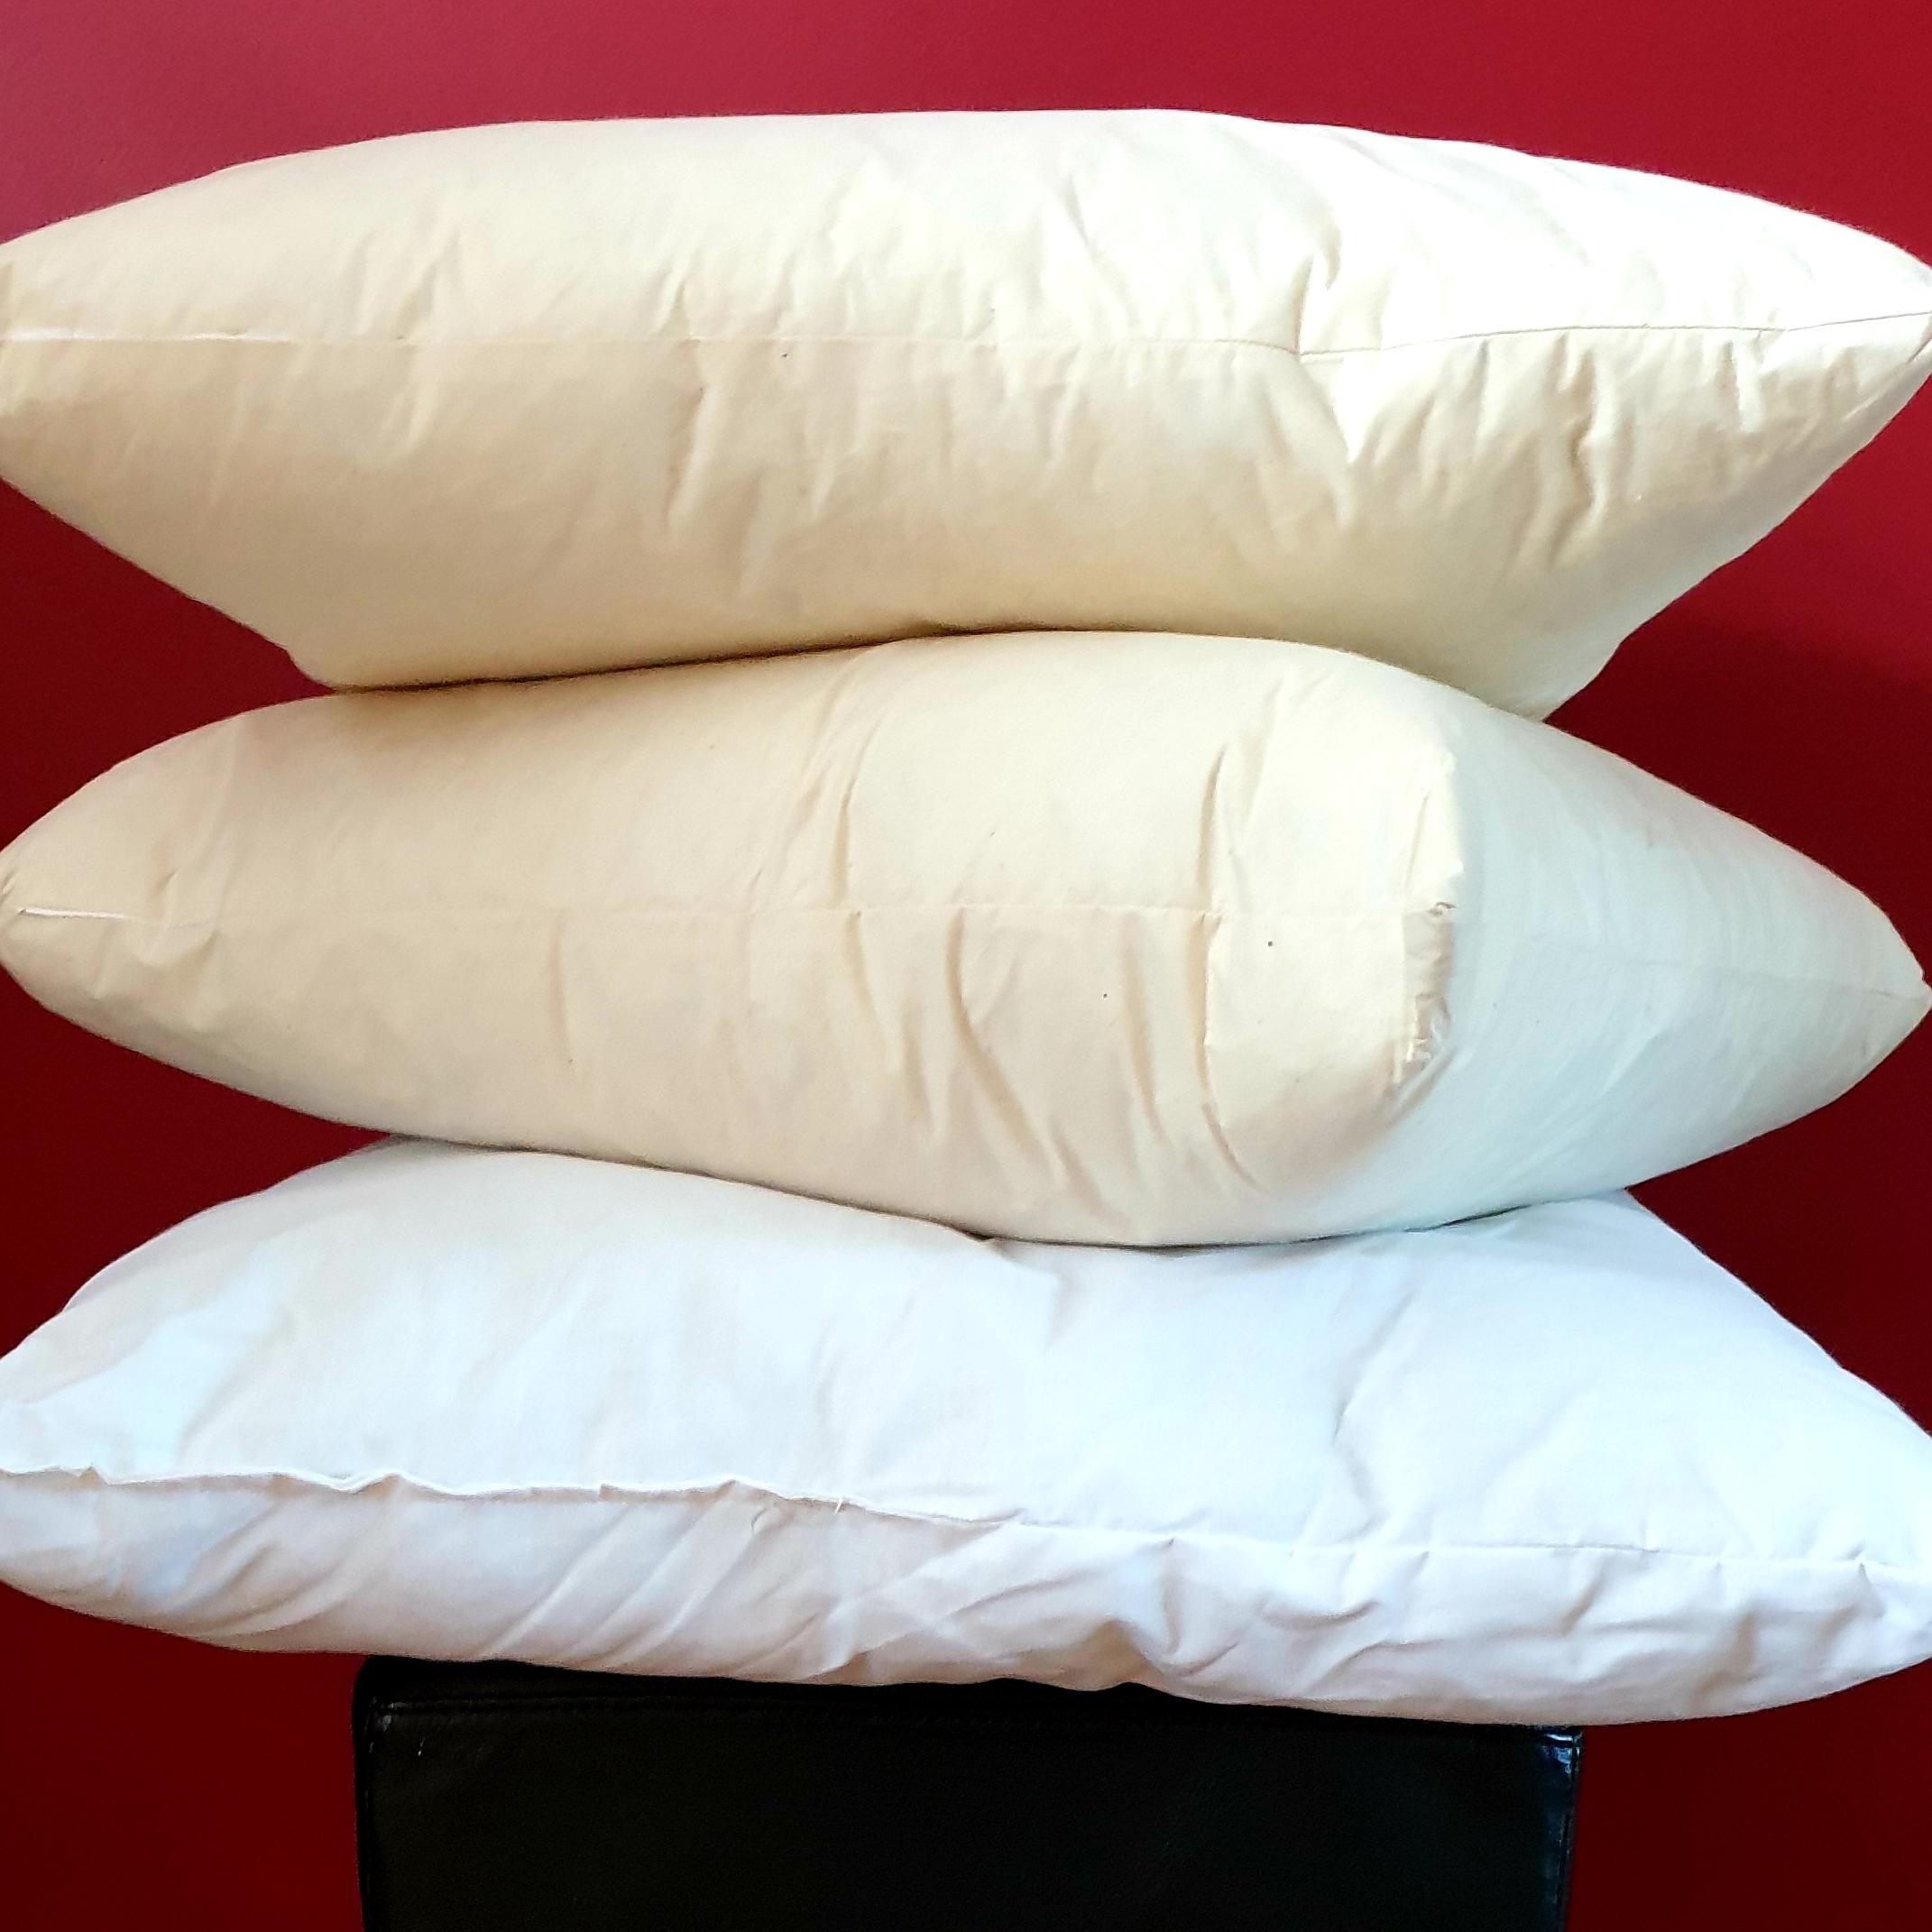 Group shot of the three main types of cushion inner pad from thetinkan. Eco-Hollowfibre, duck feather and duck feather & down.